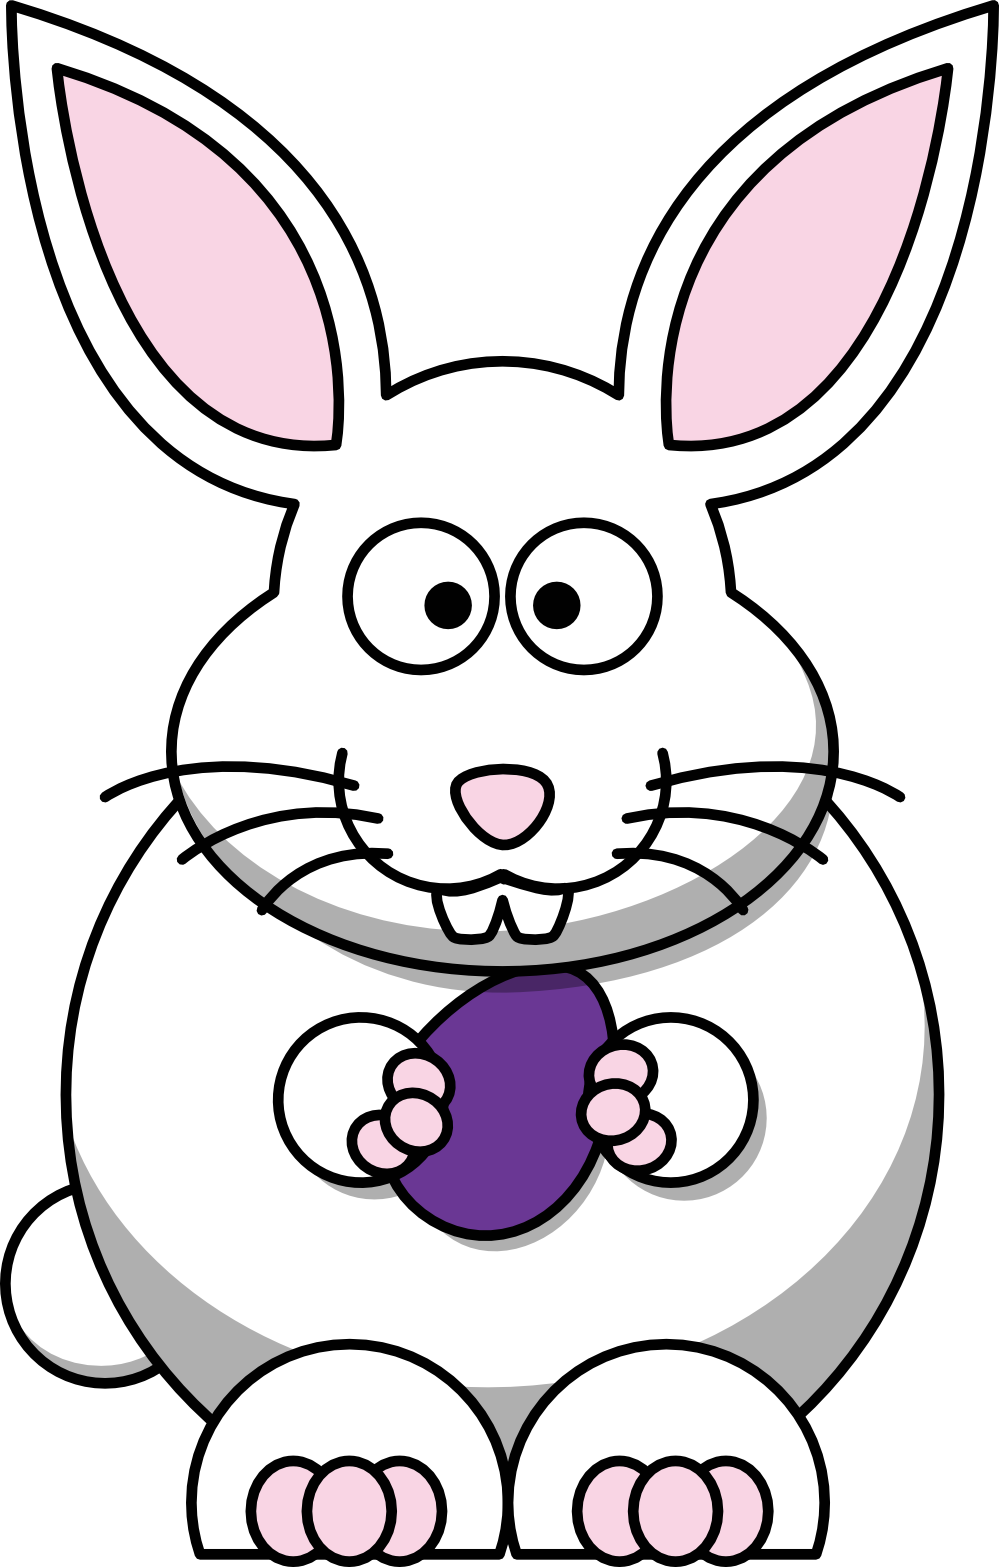  collection of for. Free clipart rabbit